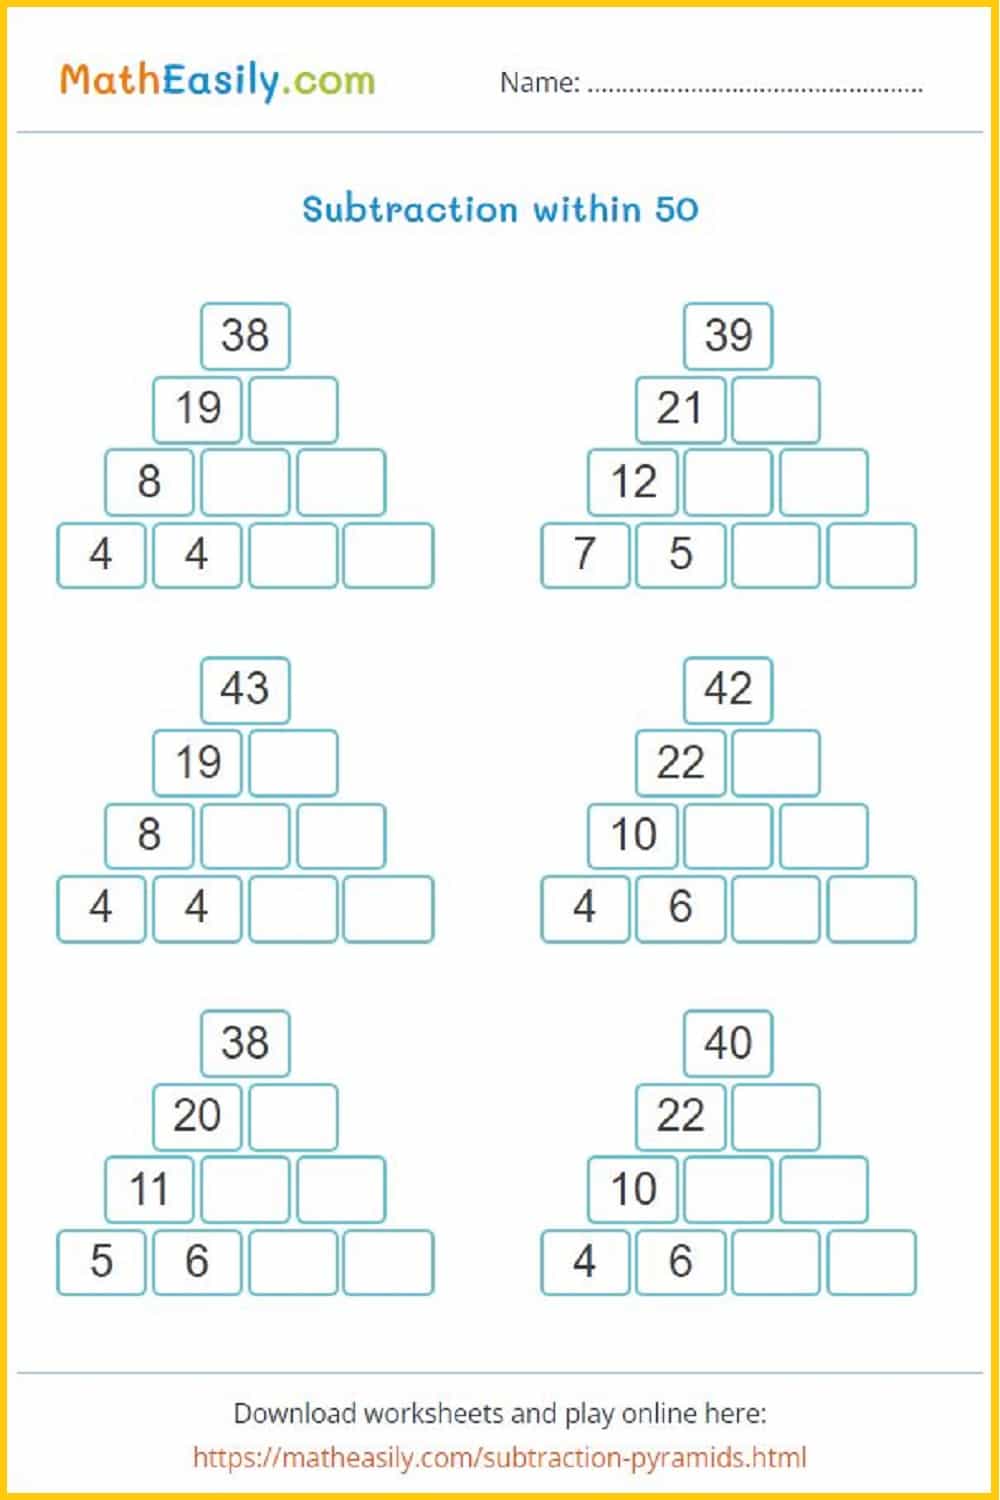 subtraction pyramid puzzle worksheets. Printable subtraction number pyramid worksheets in PDF. missing number pyramid puzzle.
        addition and subtraction pyramid worksheet.